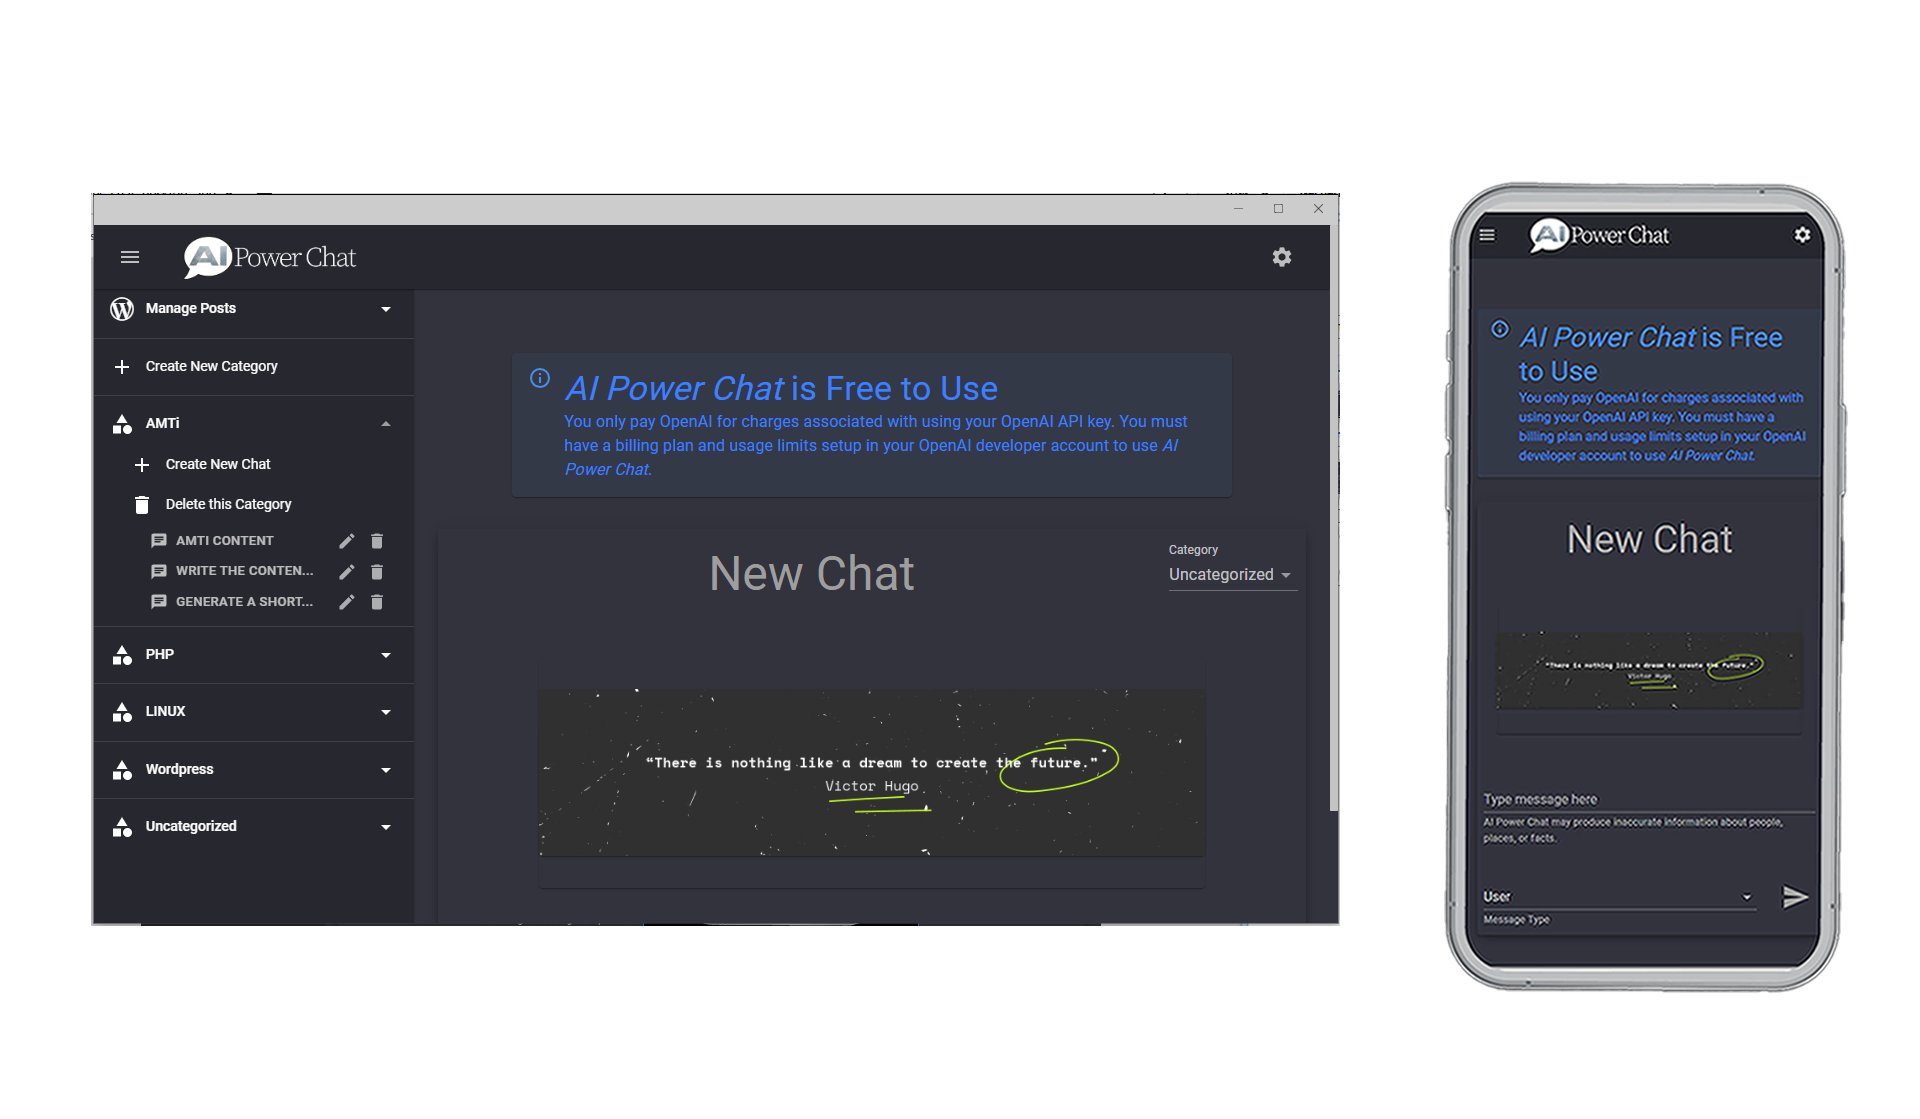 ai power chat is available on desktop and mobile